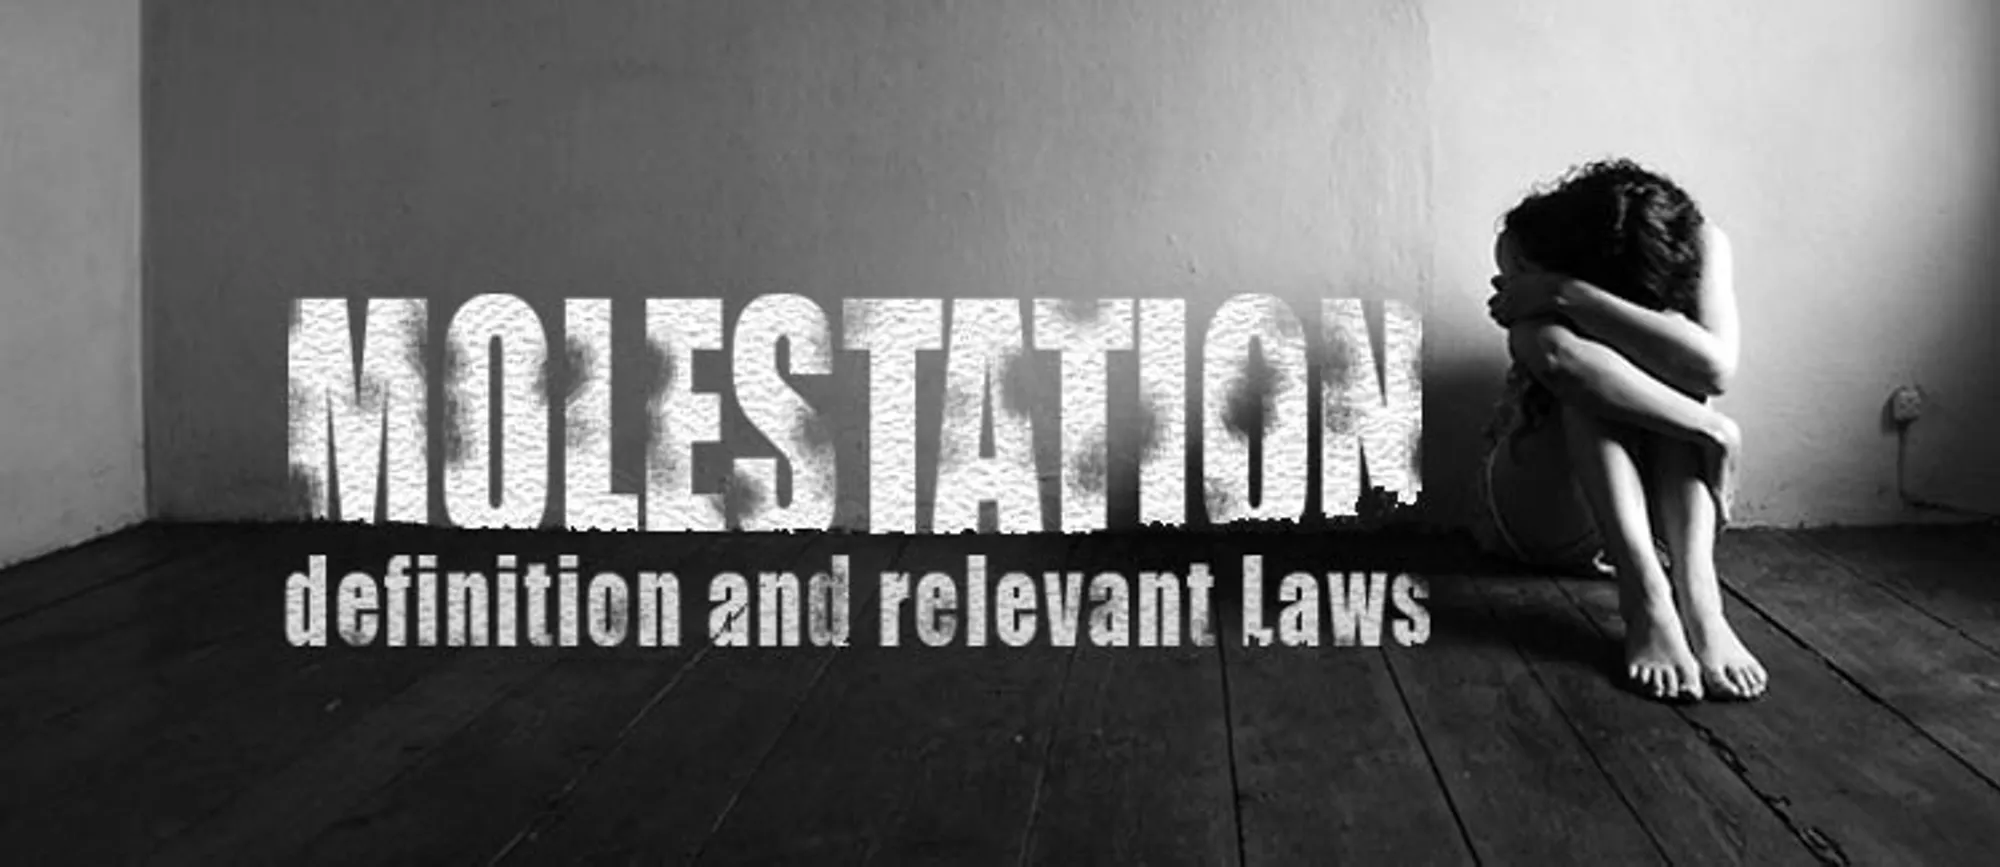 Molestation – Definition and relevant Laws